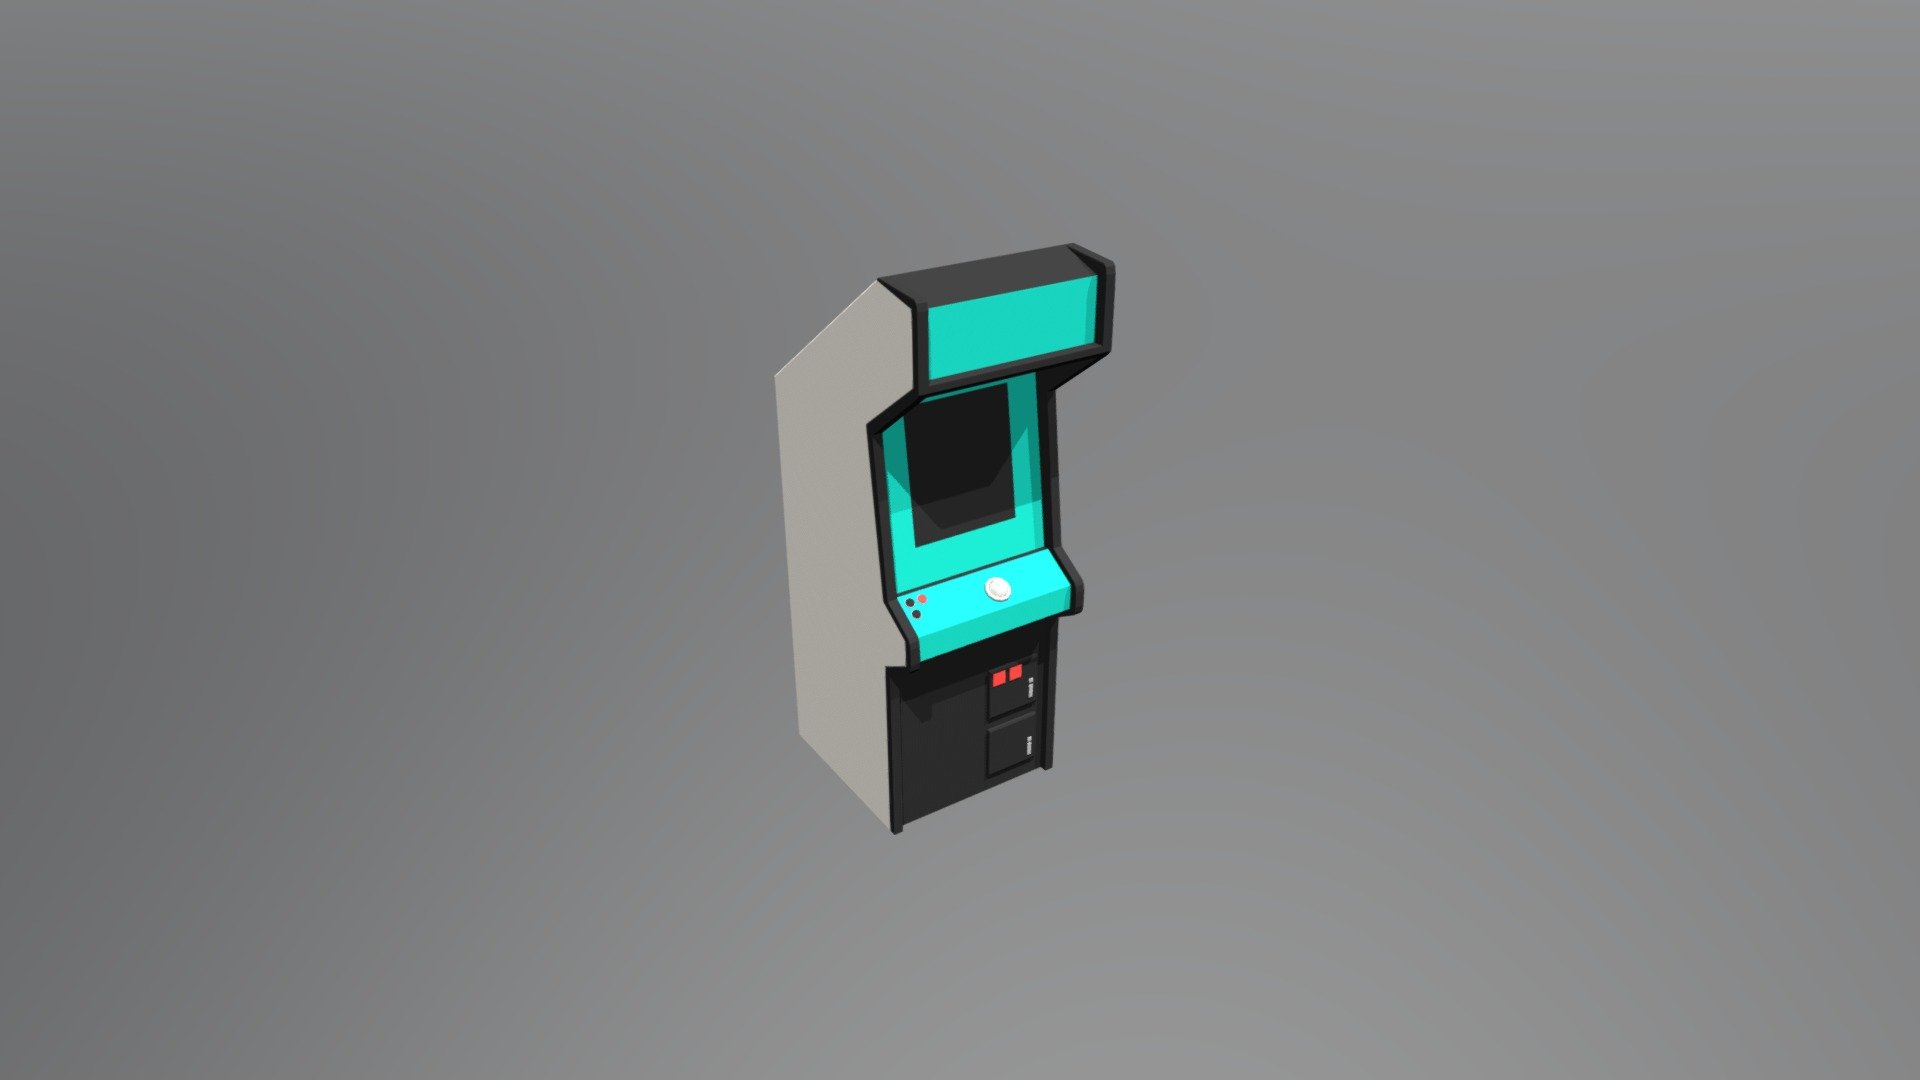 Just a low poly acrade machine 3d model